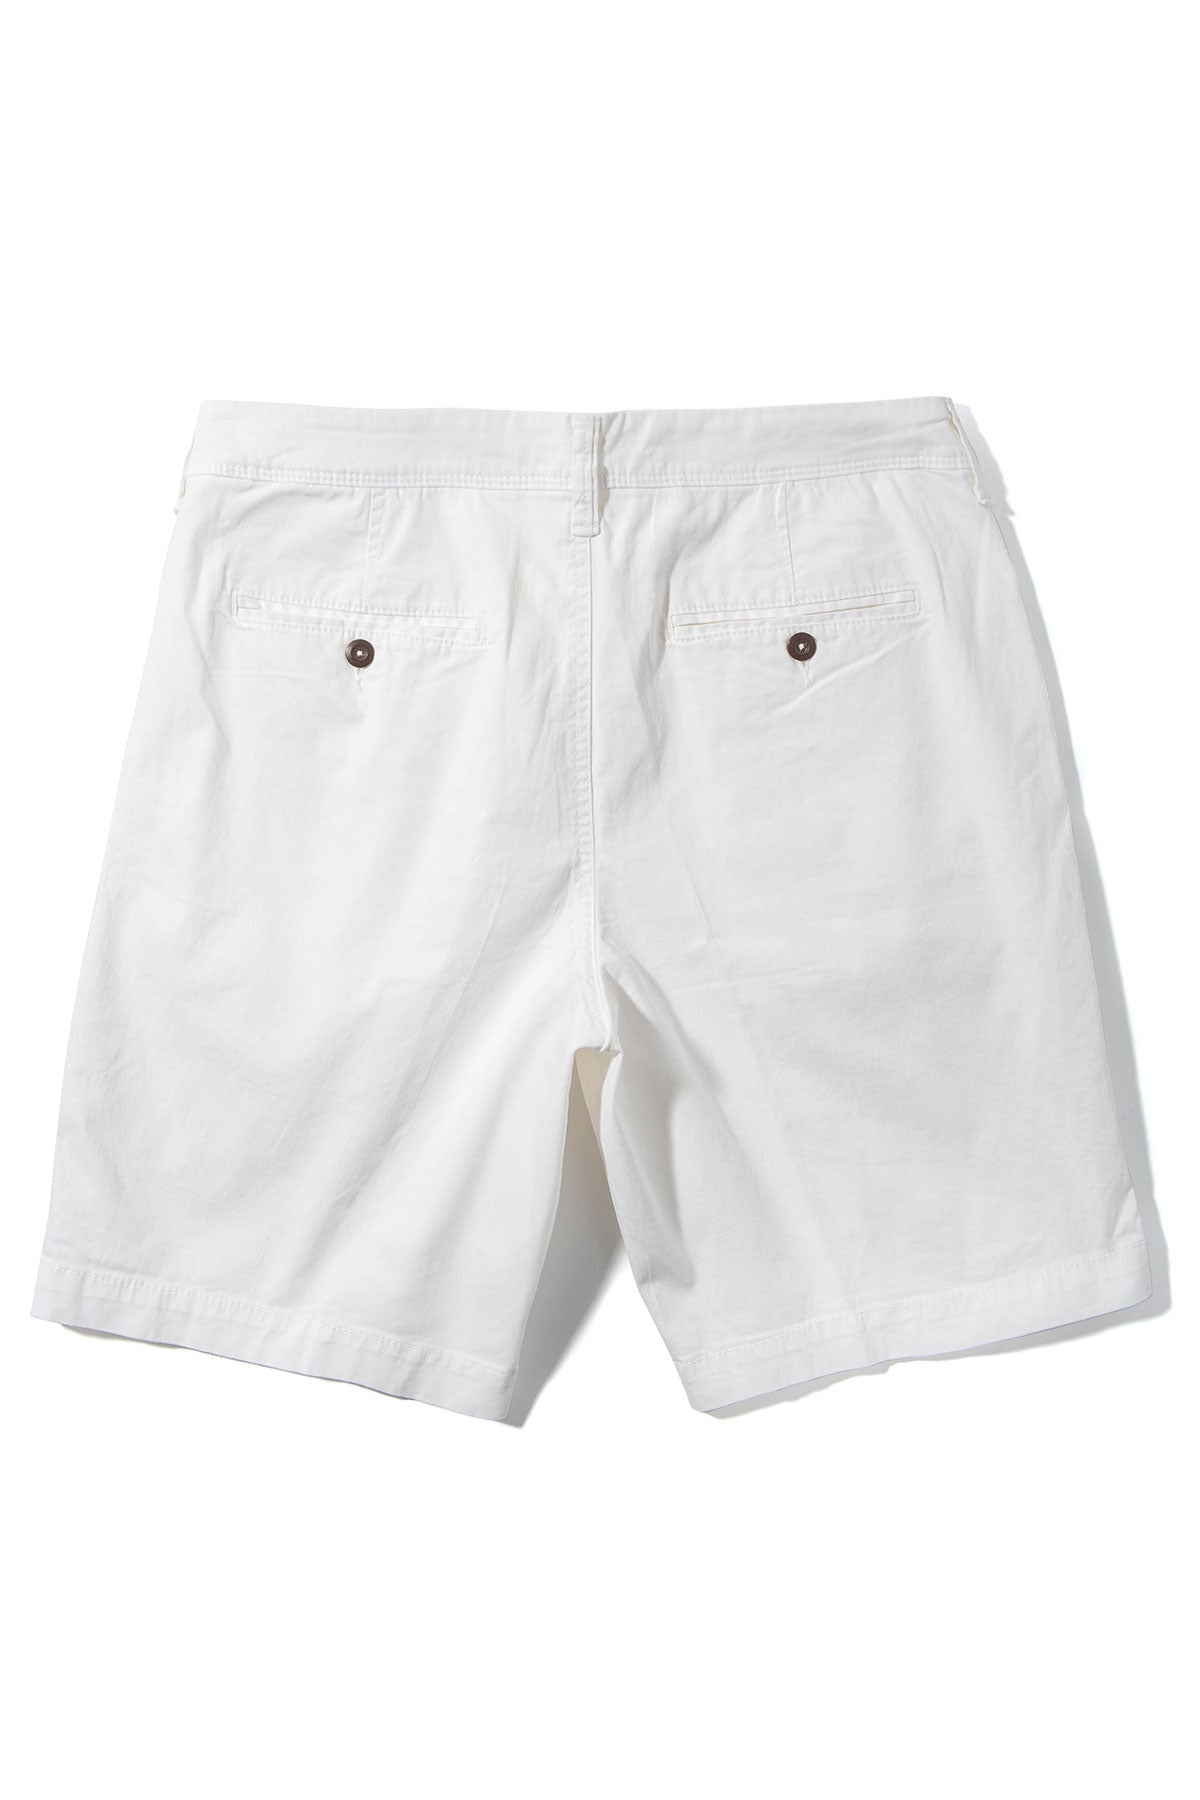 Rockport 9" Stretch Cotton Shorts in White | Mens - Shorts | Georg Roth